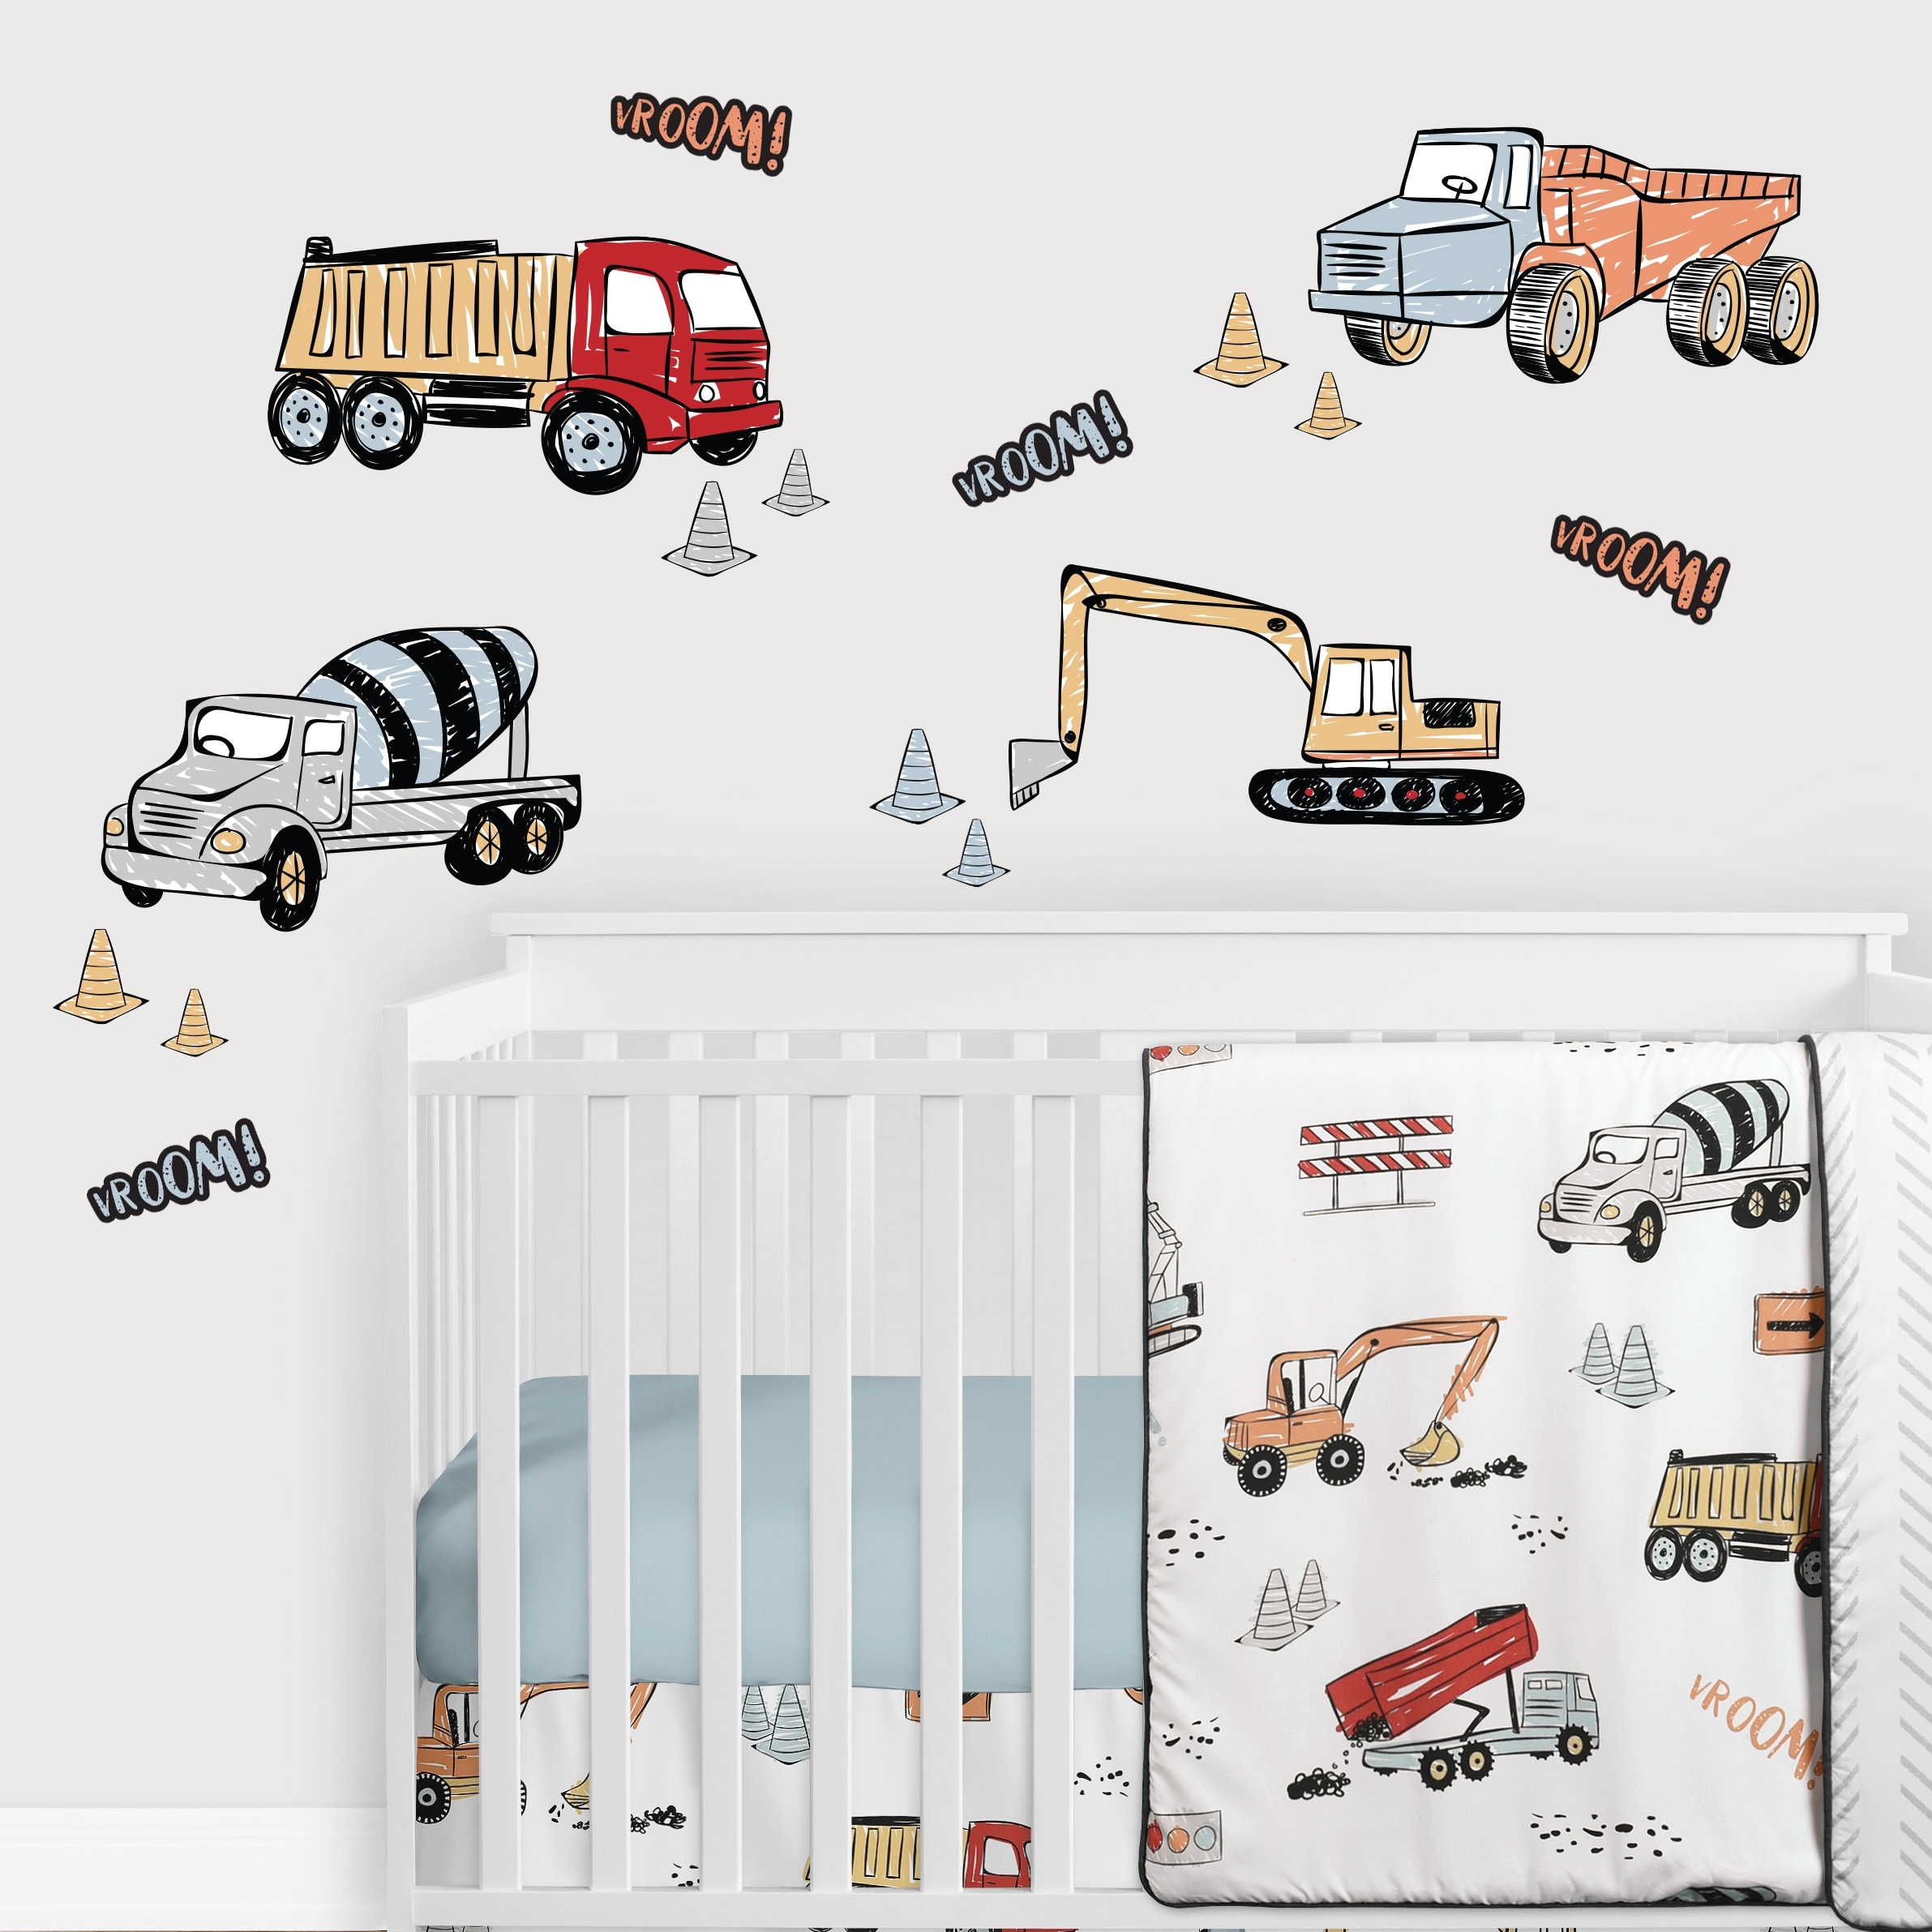 Construction Truck Peel and Stick Wall Decal Stickers Art Nursery Decor (Set of 4) - Grey Yellow Orange Red Blue Transportation